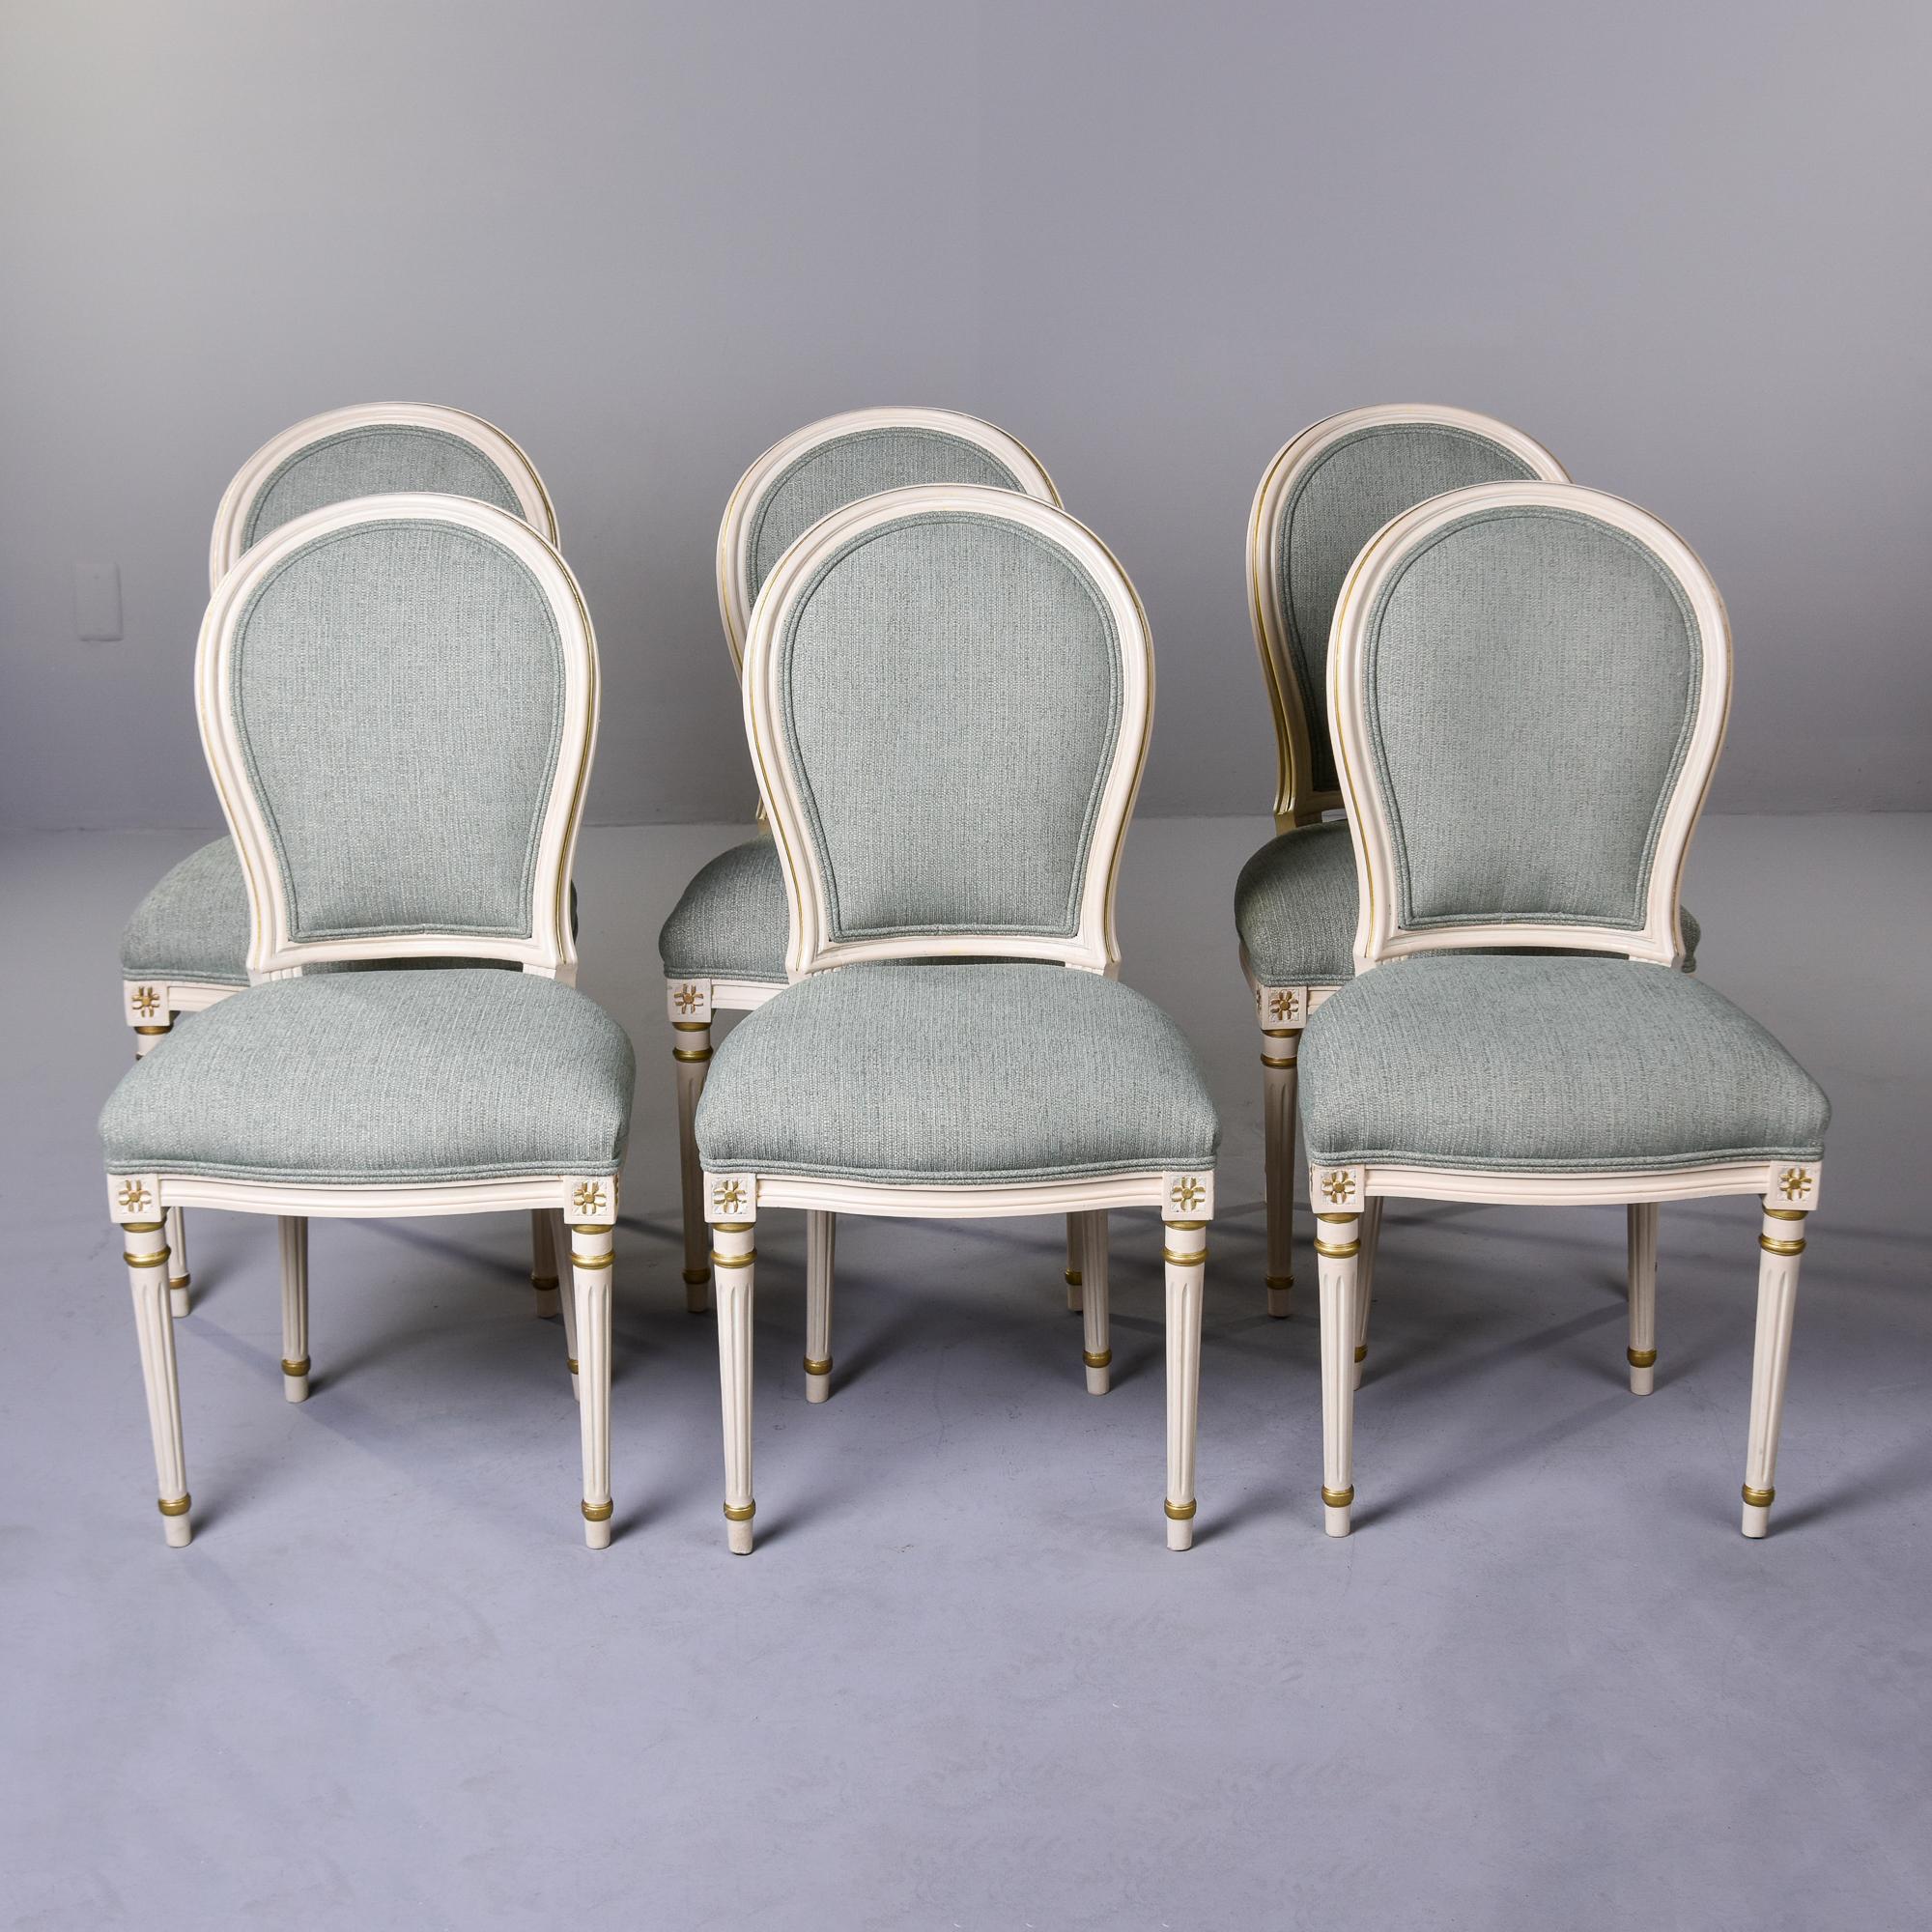 This set of six circa 1920s Louis XVI style dining chairs was found in France. The traditional style frames have rounded backs with carved rosettes at the top of the reeded legs and an off-white painted finish with gilded accents. We had the chairs